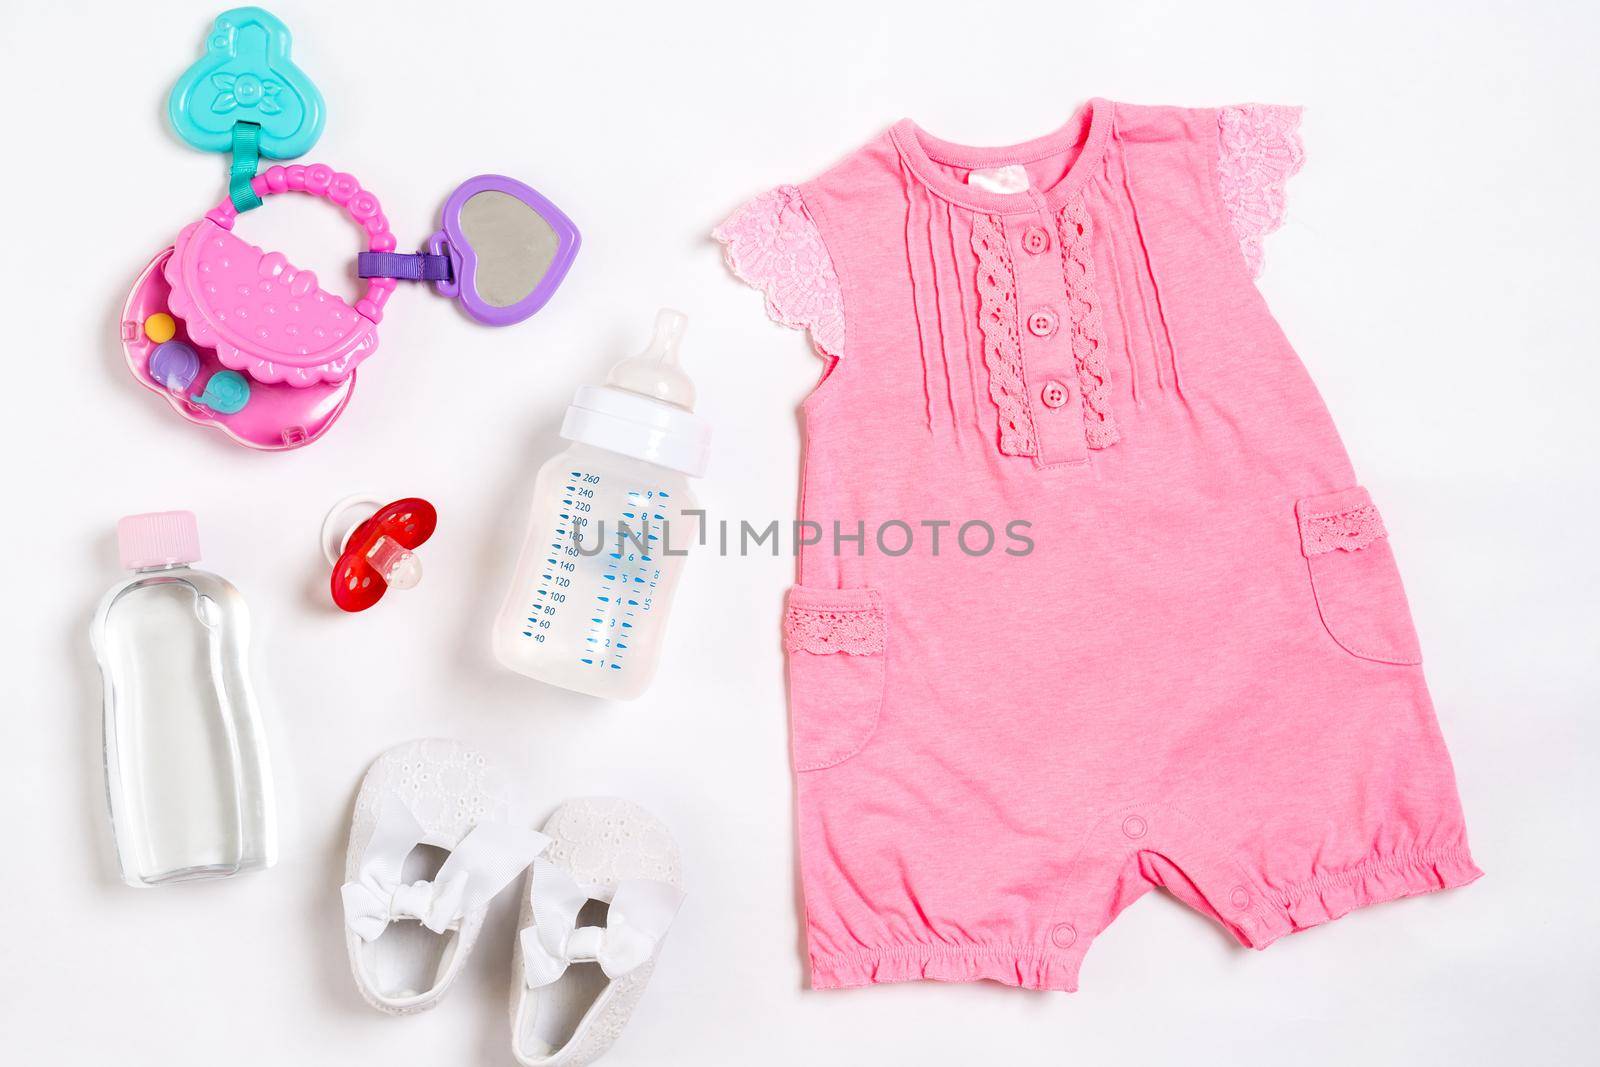 Things for babies on white background by nazarovsergey